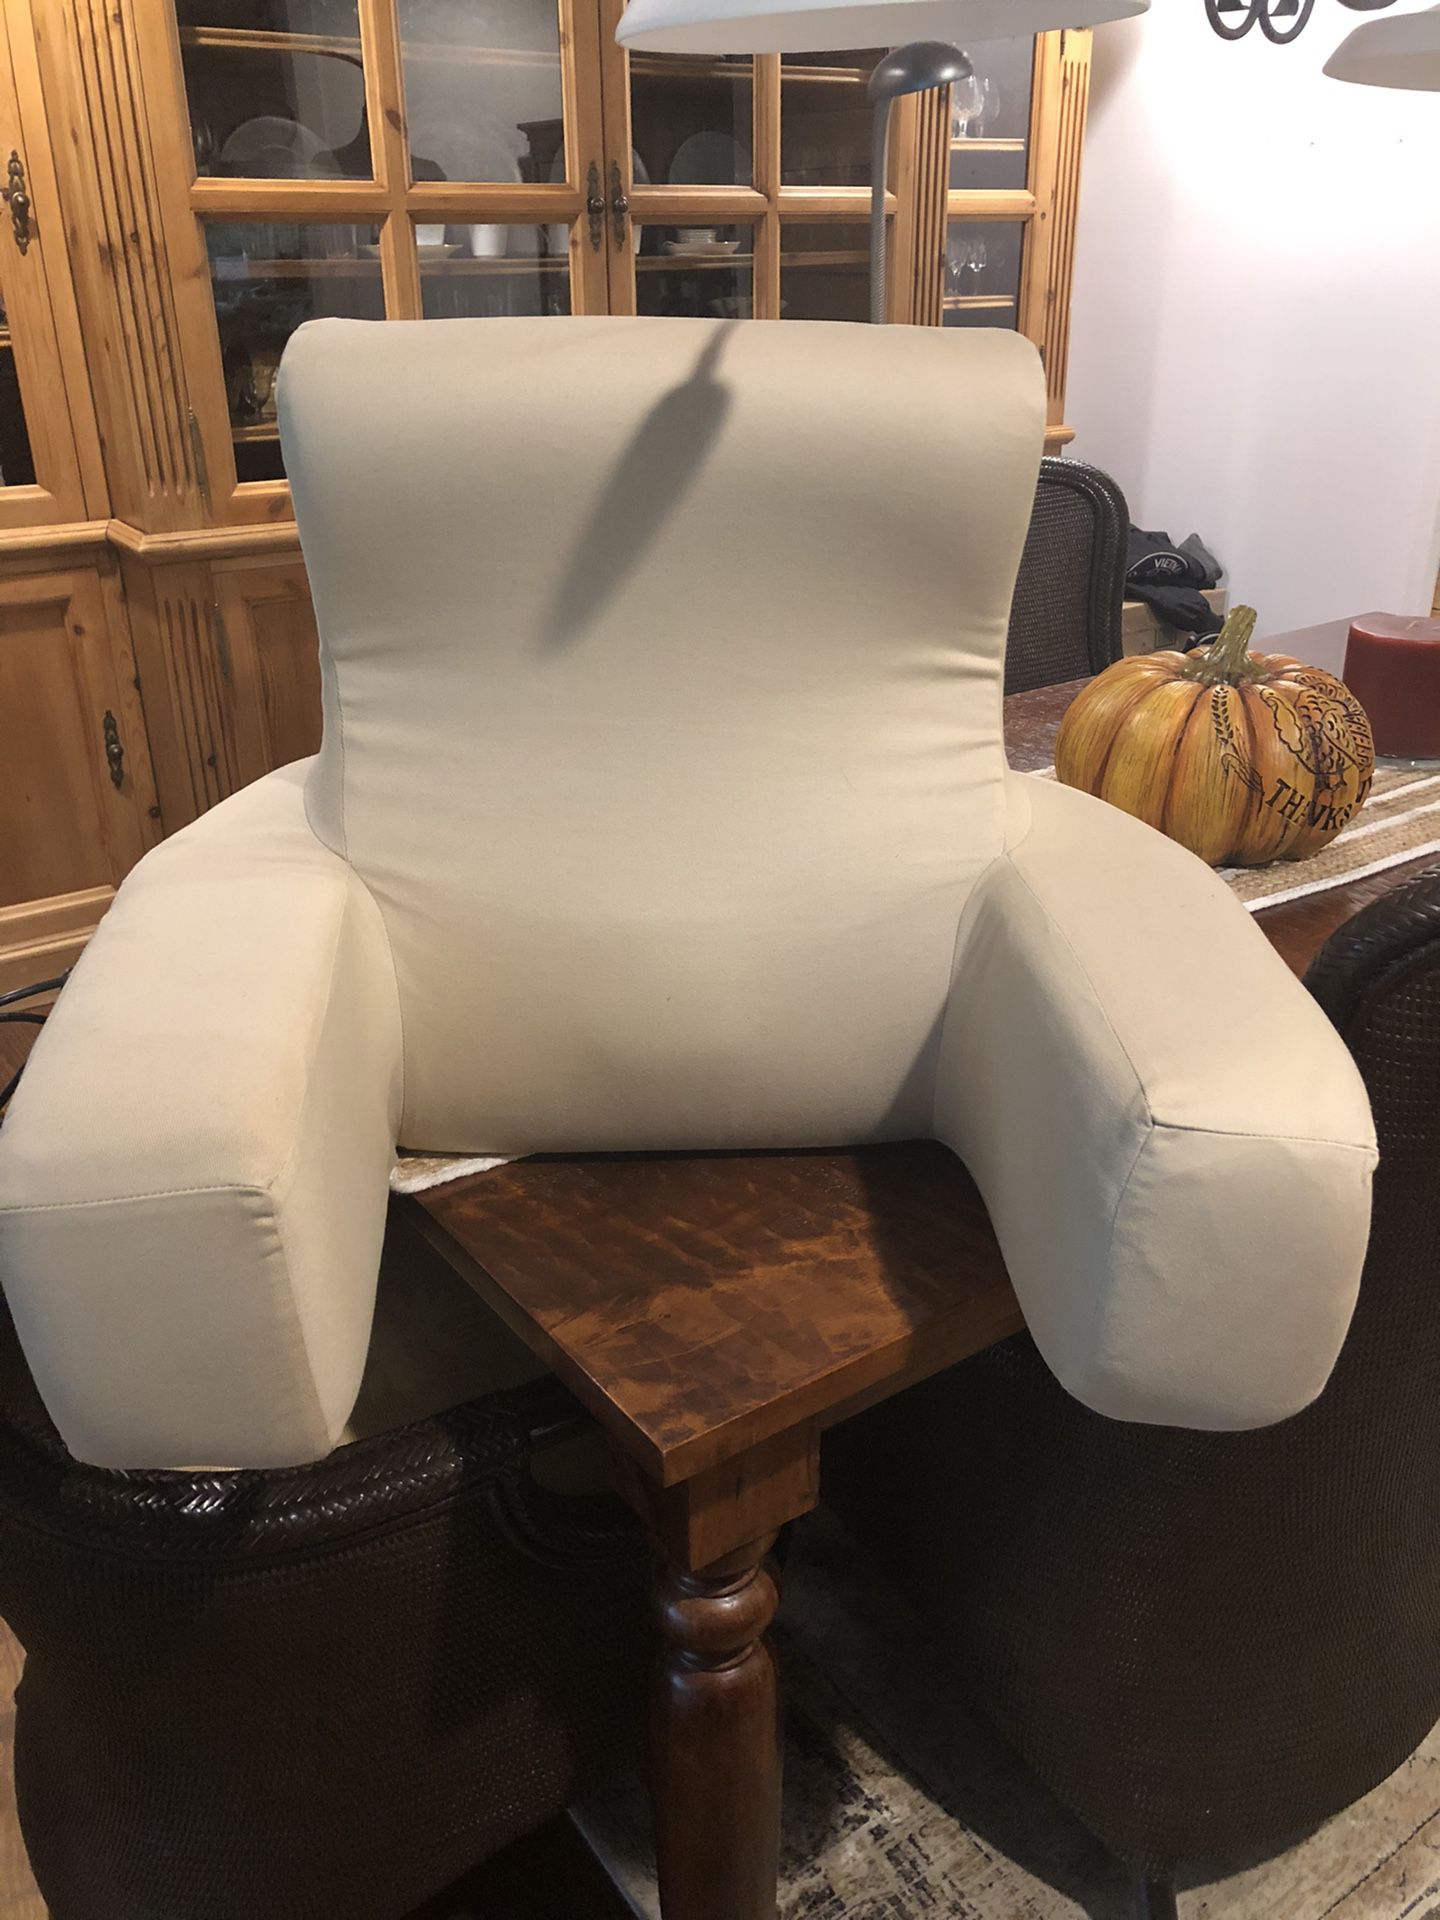 Frontgate Bed Cushion/Massager/Light $25